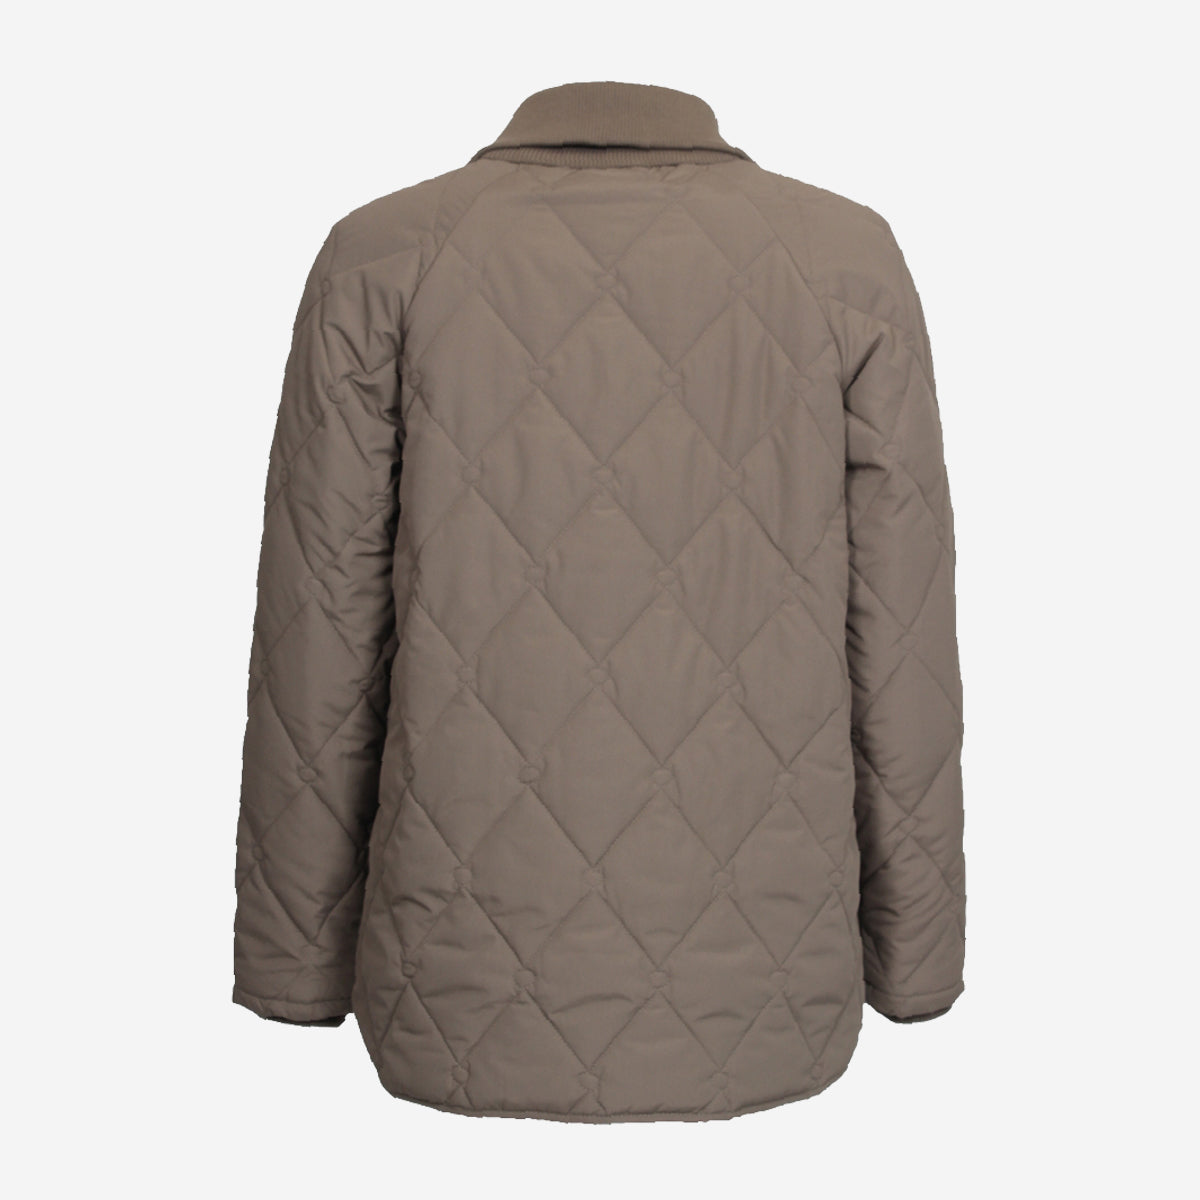 DIDDI QUILTED JACKET